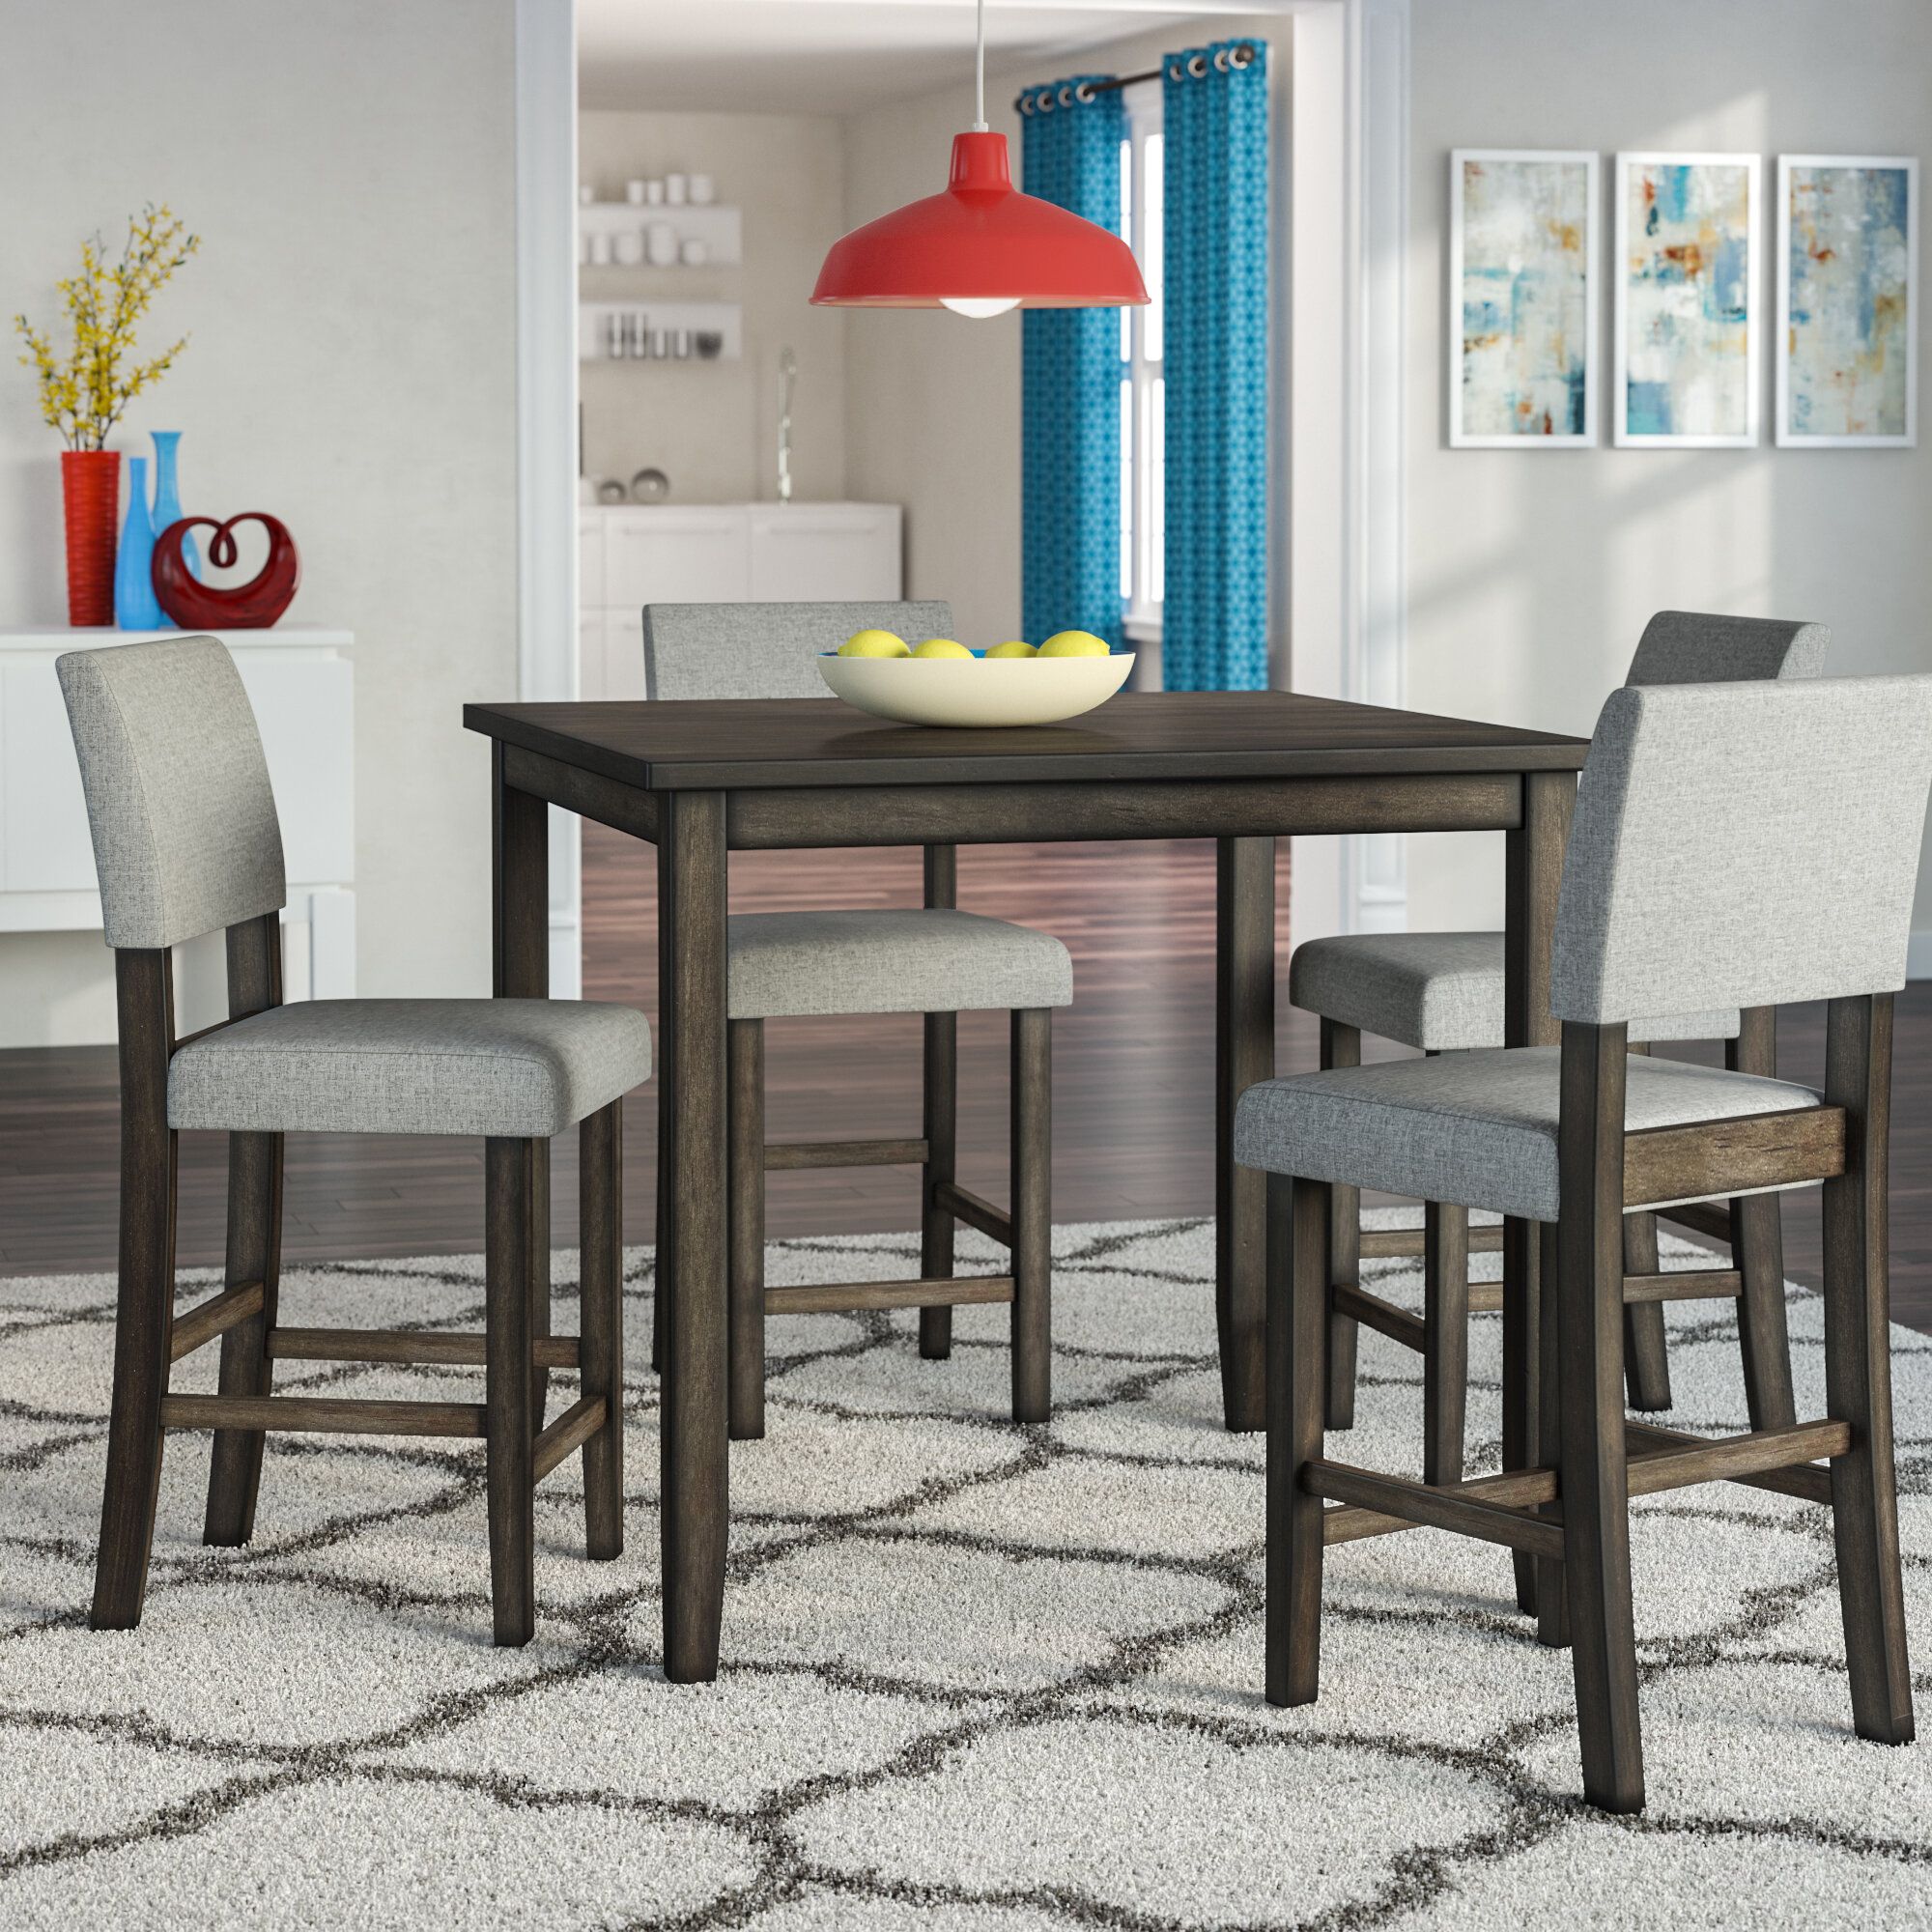 Details About Ebern Designs Terrazas 5 Piece Dining Set For Most Popular Lightle 5 Piece Breakfast Nook Dining Sets (Photo 8 of 20)